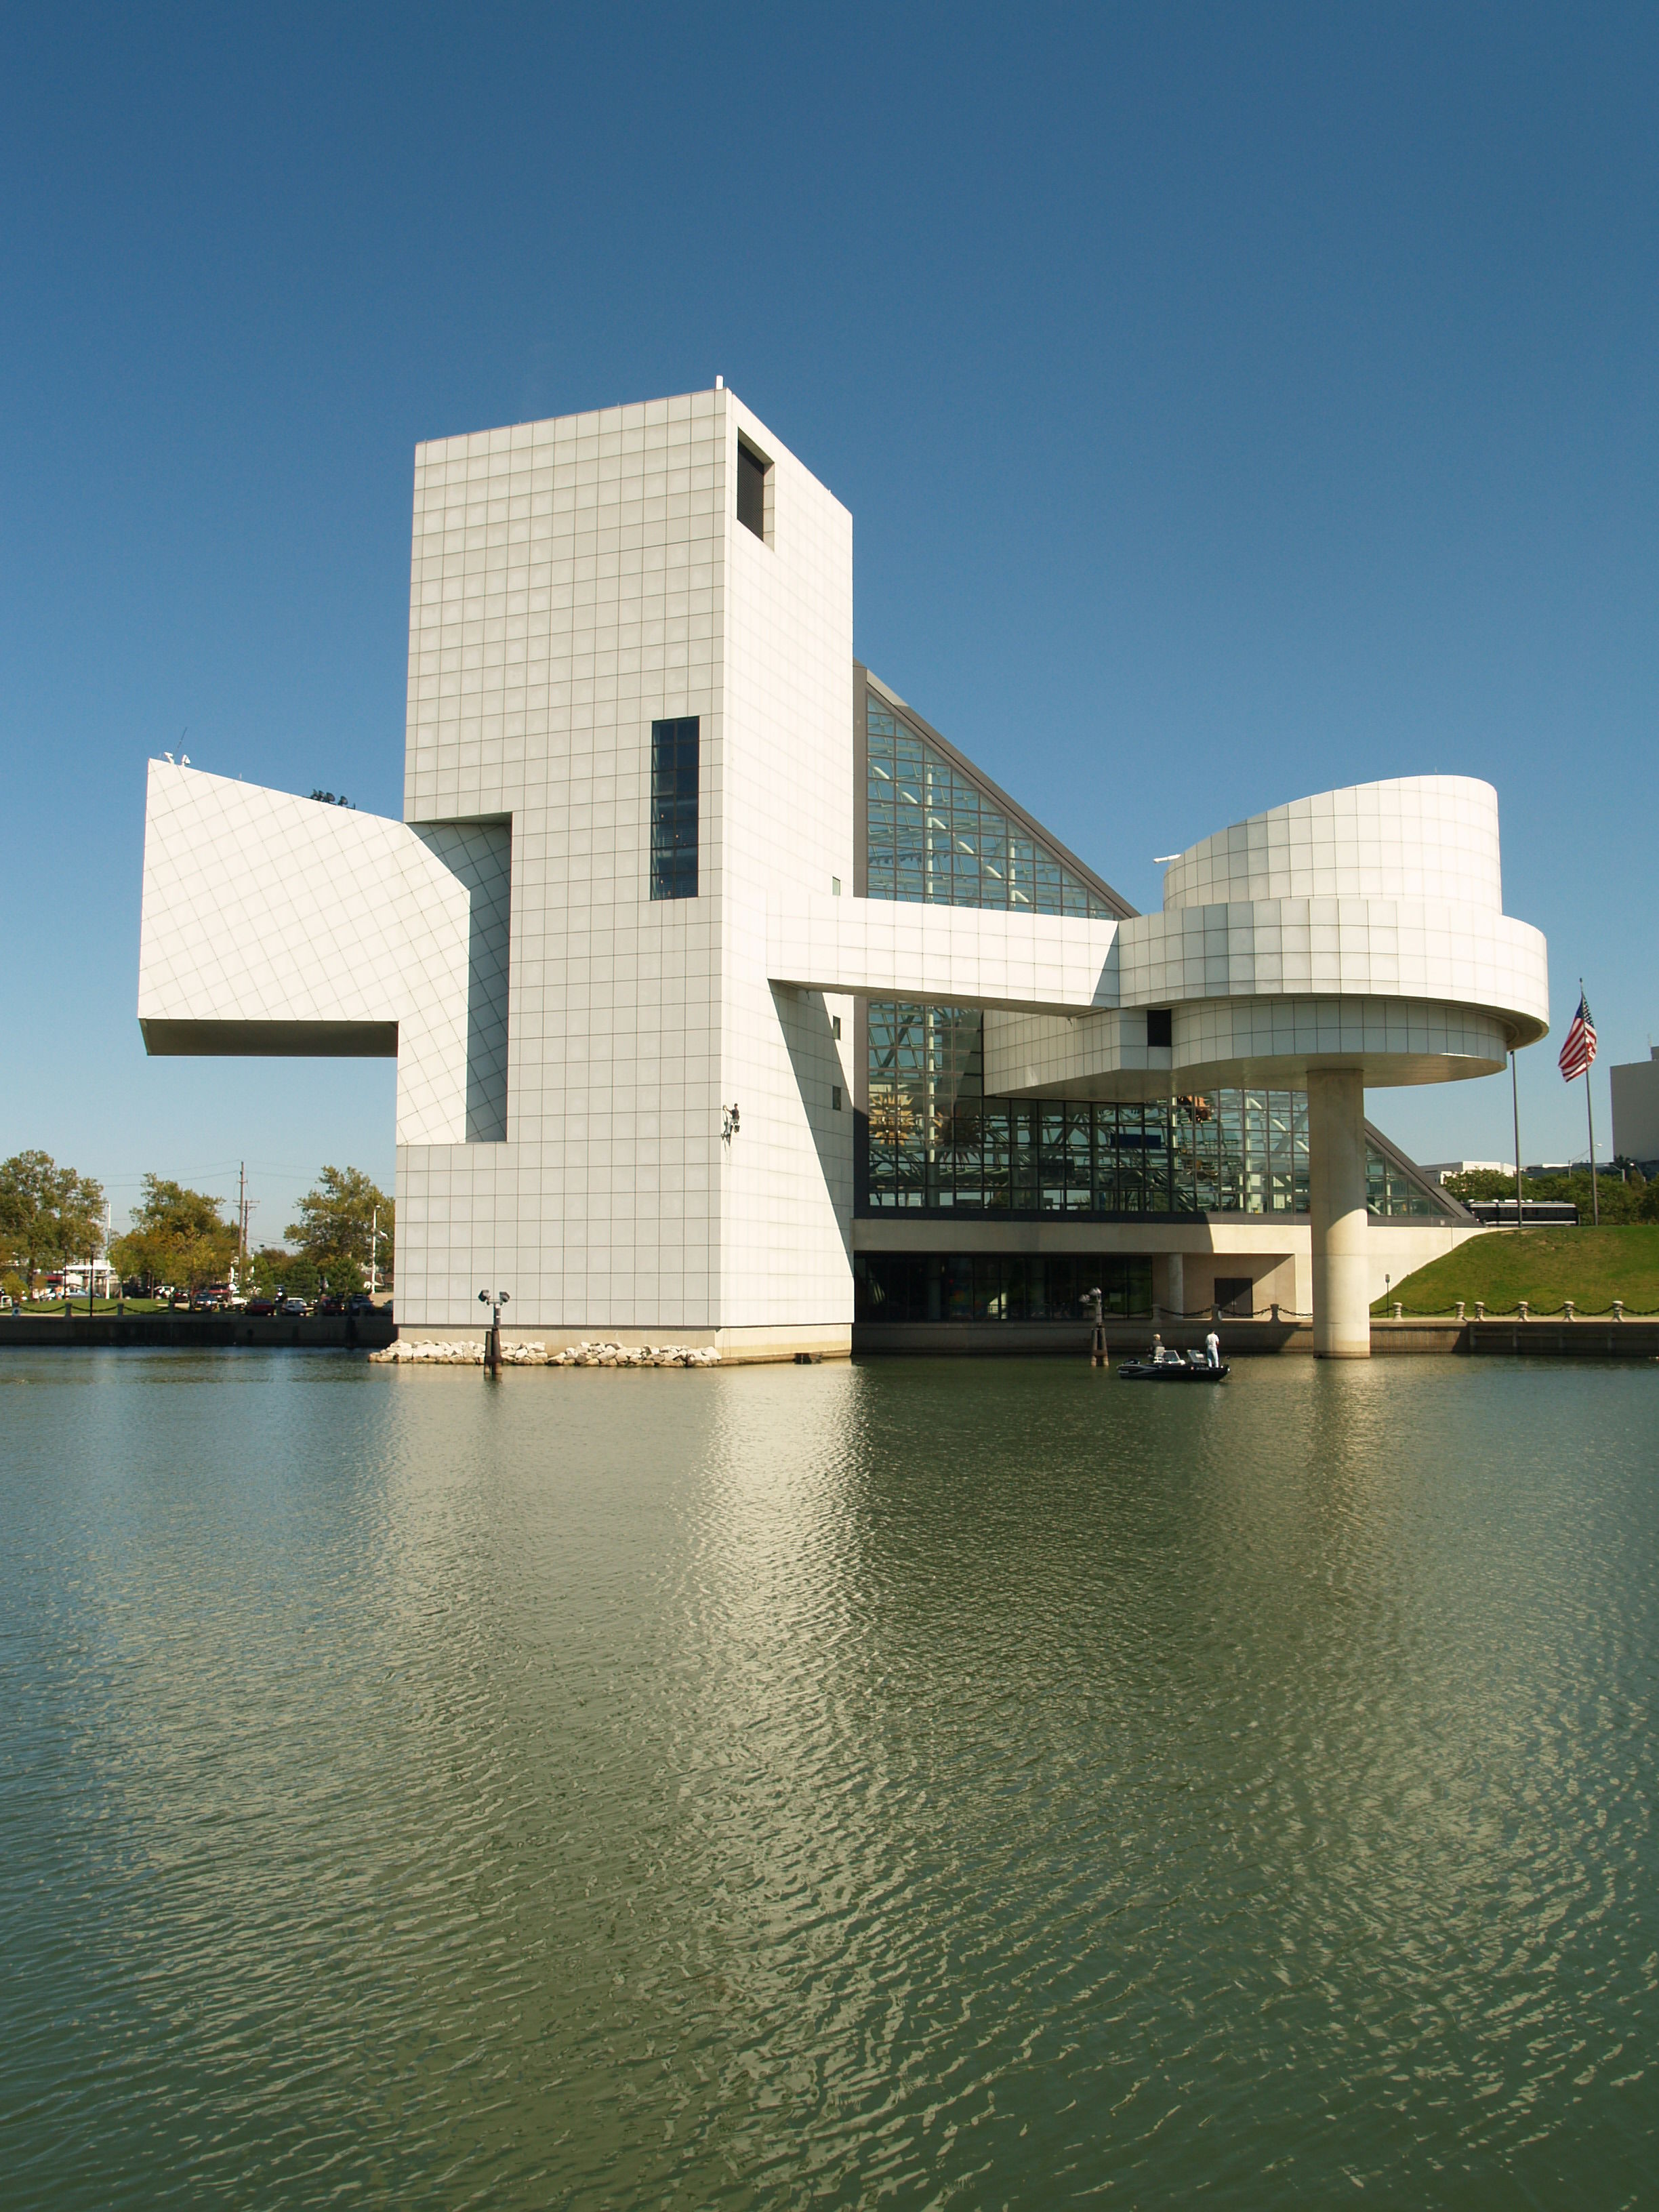 Rock'n Roll Hall of Fame